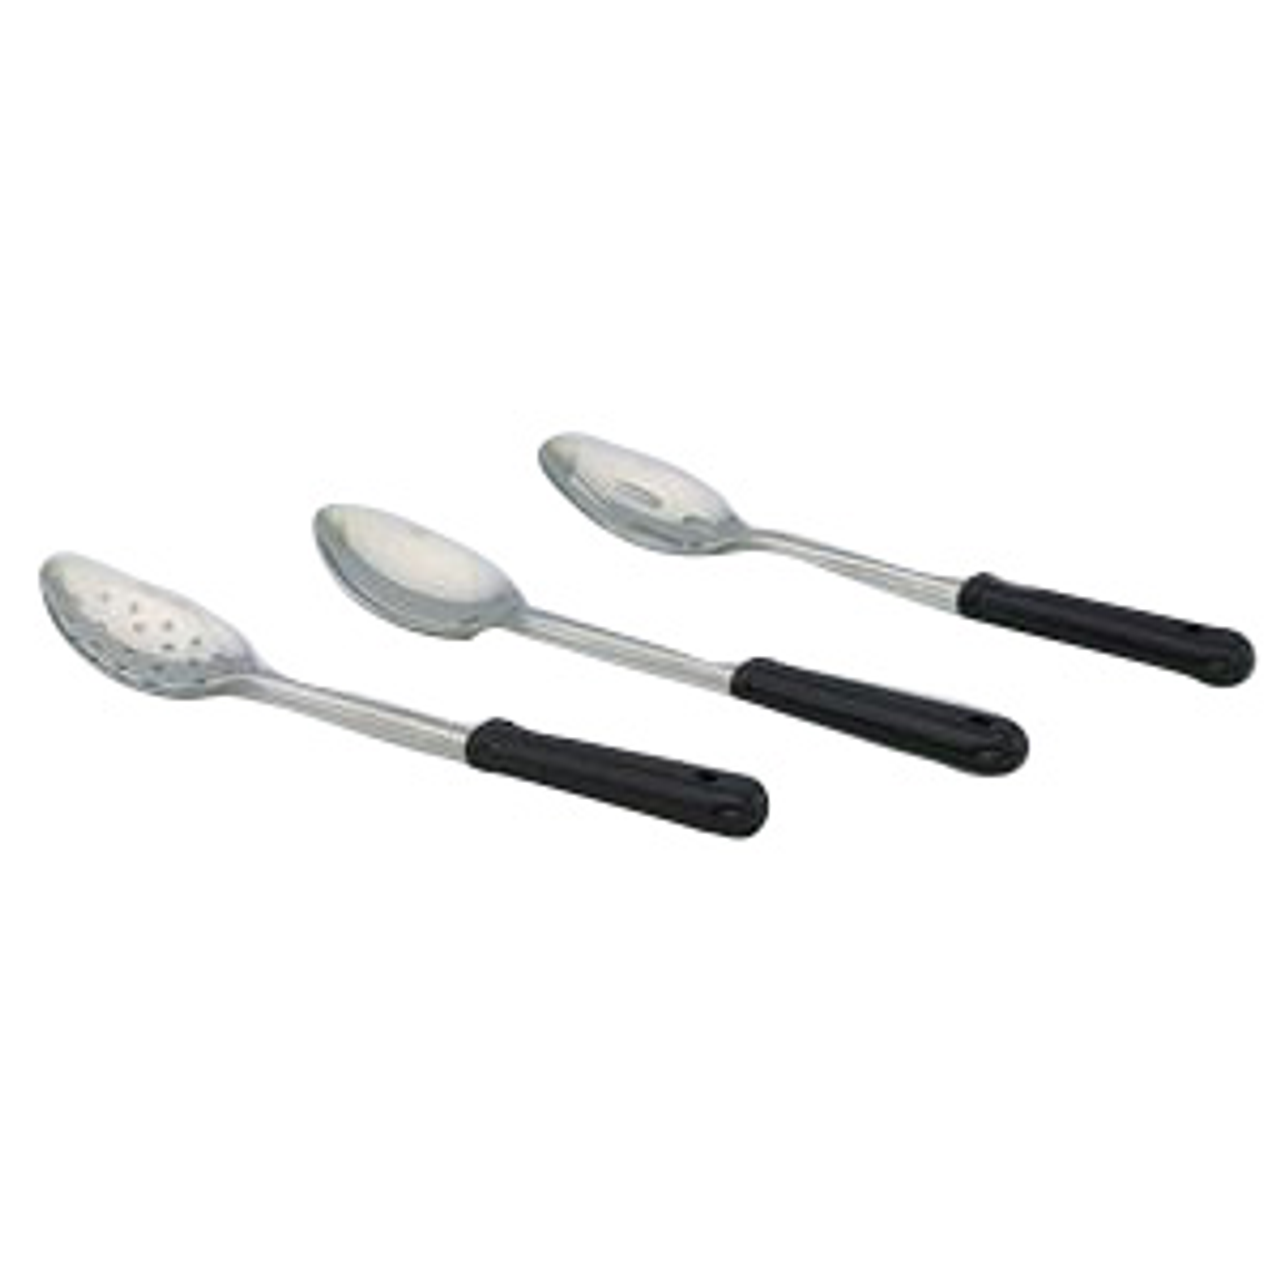 https://cdn11.bigcommerce.com/s-g3i86bef61/images/stencil/1280x1280/products/3612/3725/ABC-Procurement-BSPH-11-S-Serving-Spoon__92230.1666467828.png?c=1